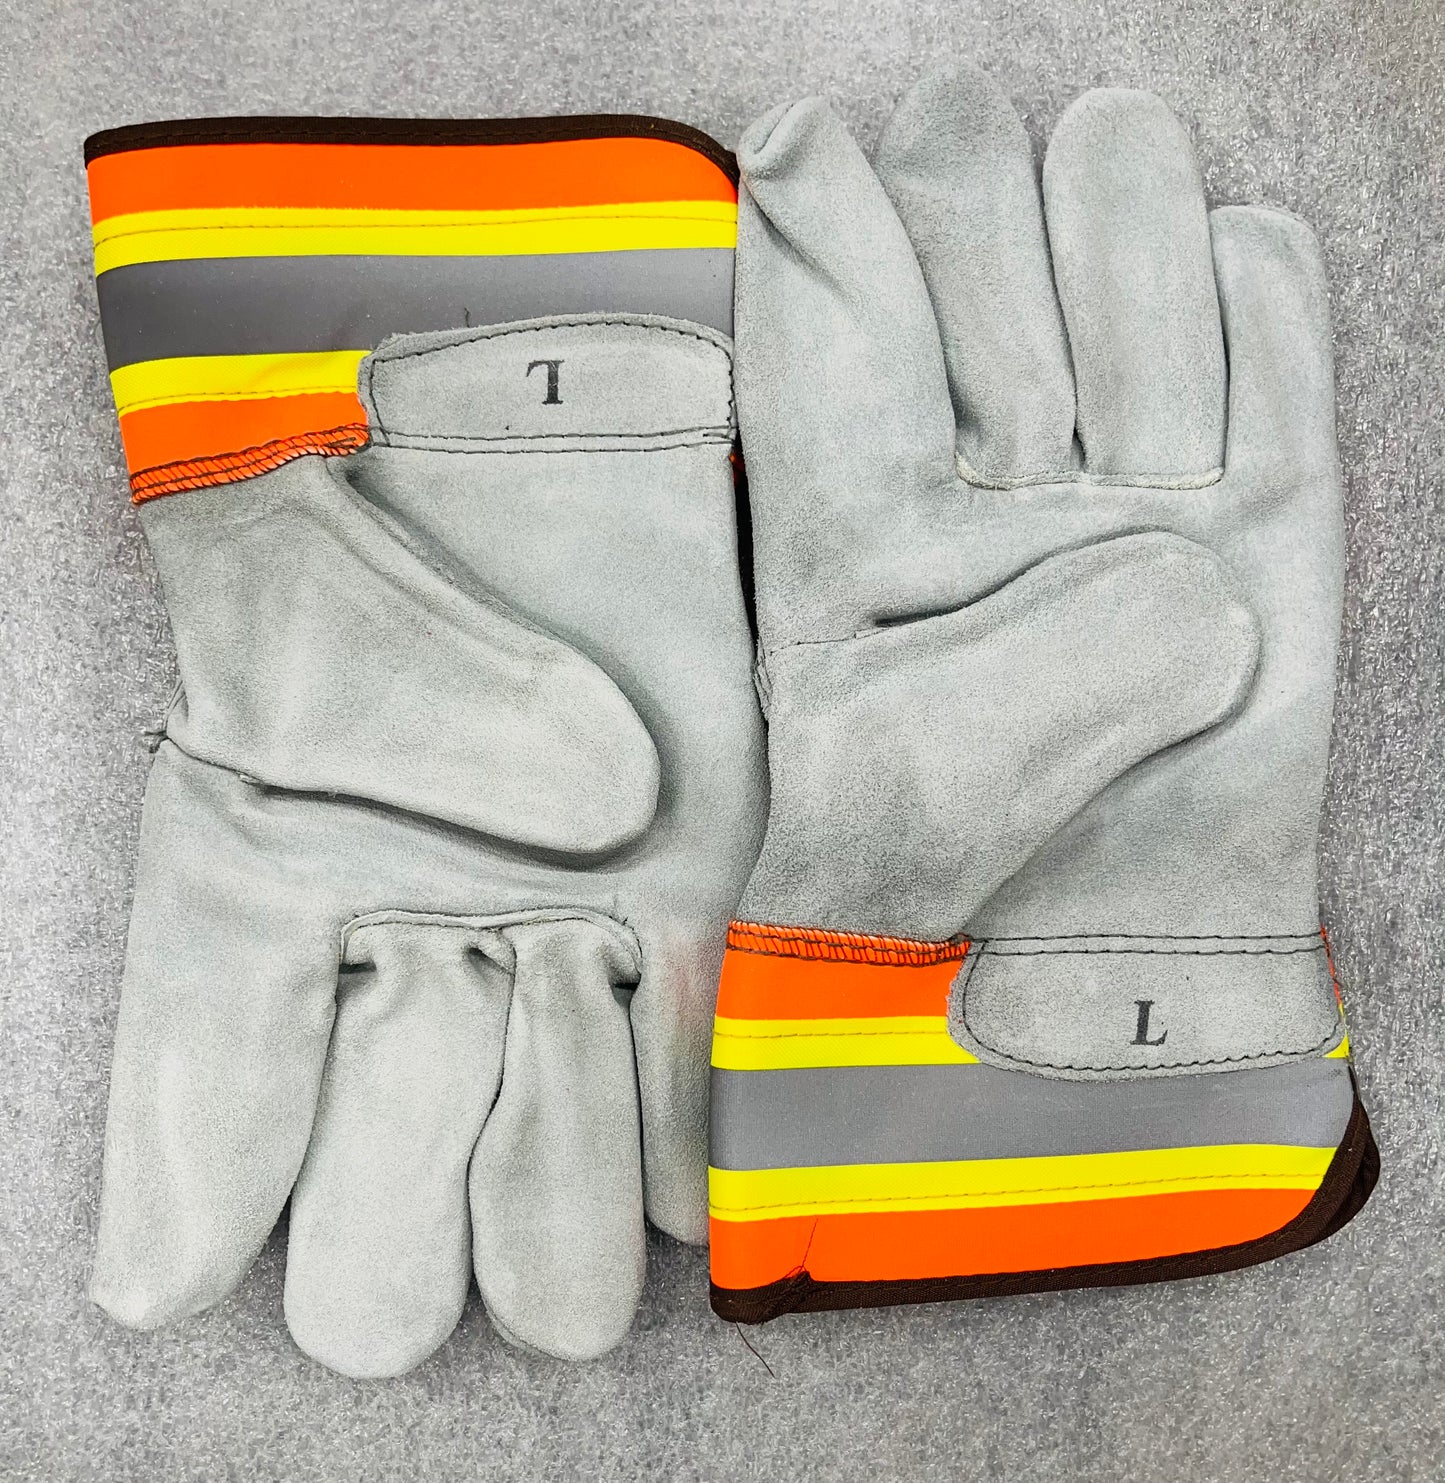 Heavy Duty Leather Work Gloves with Reflective Strip